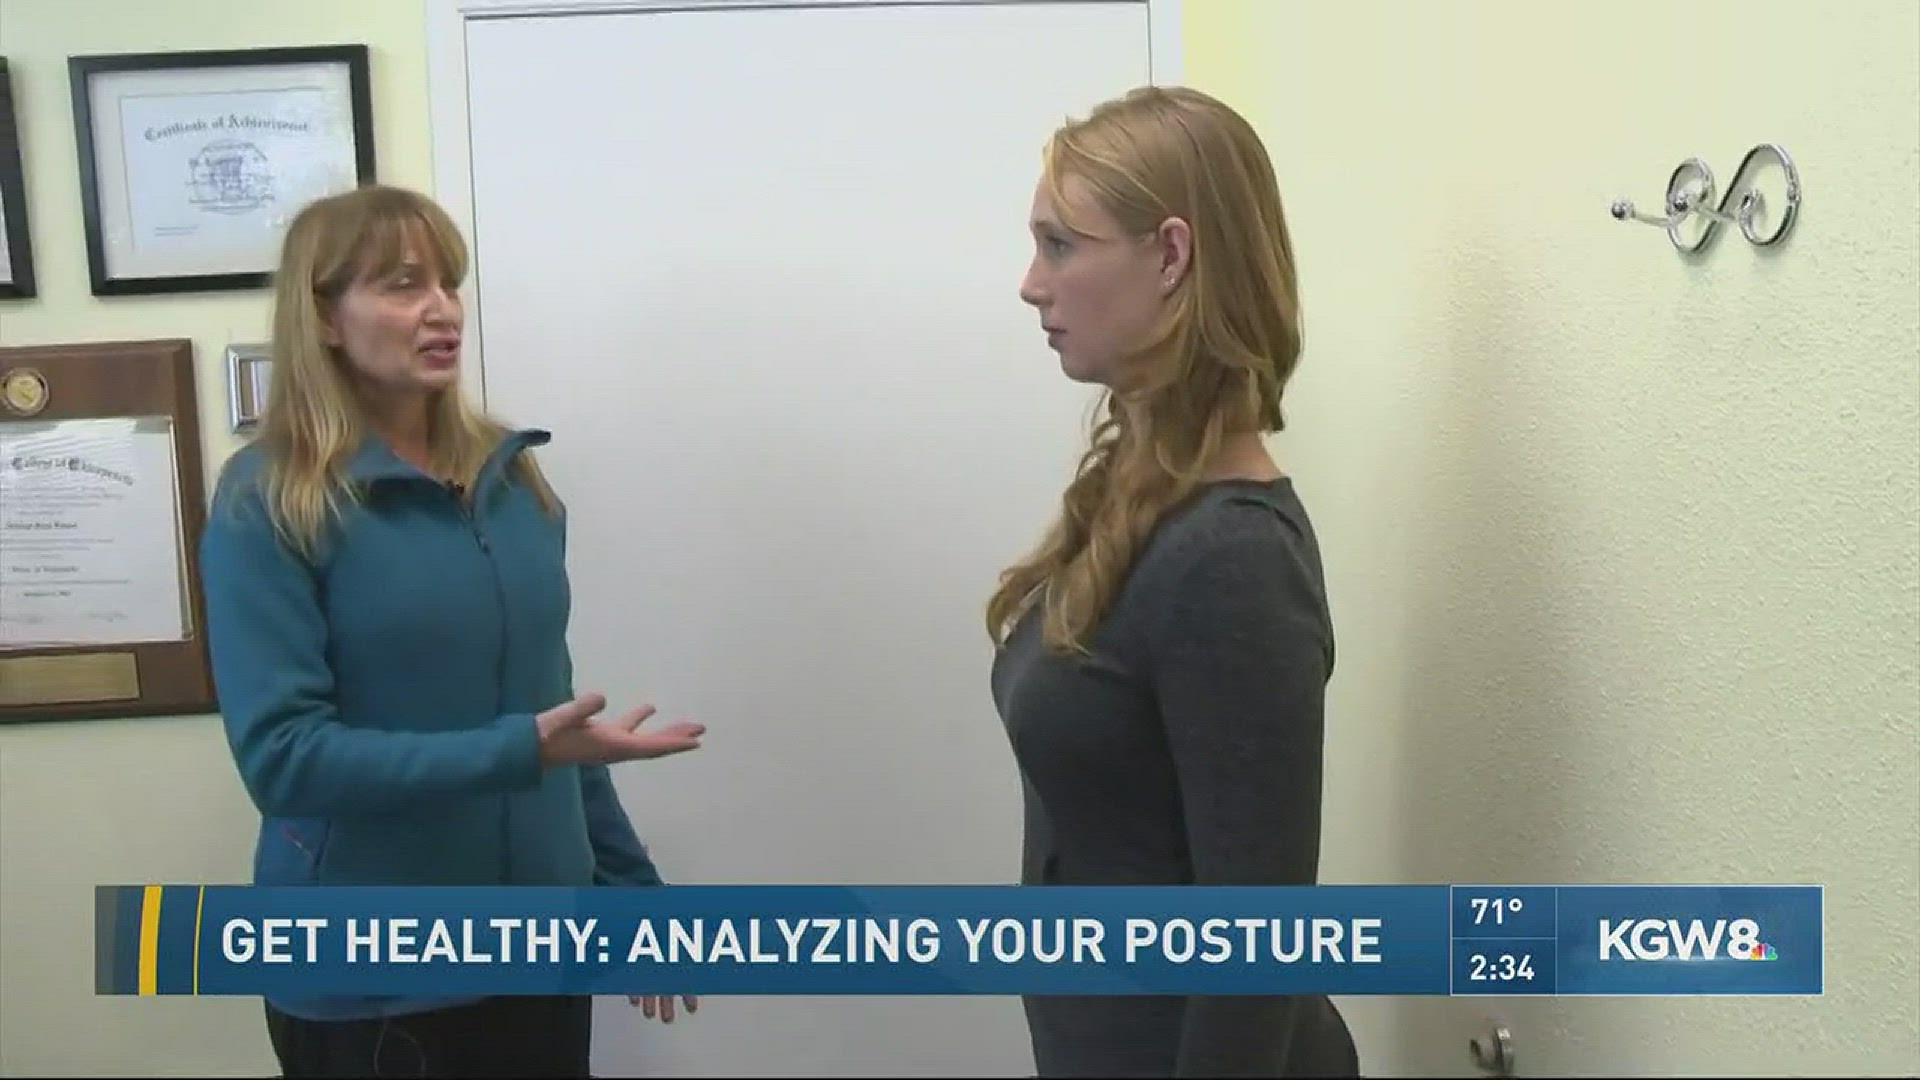 Get healthy: analyzing your posture